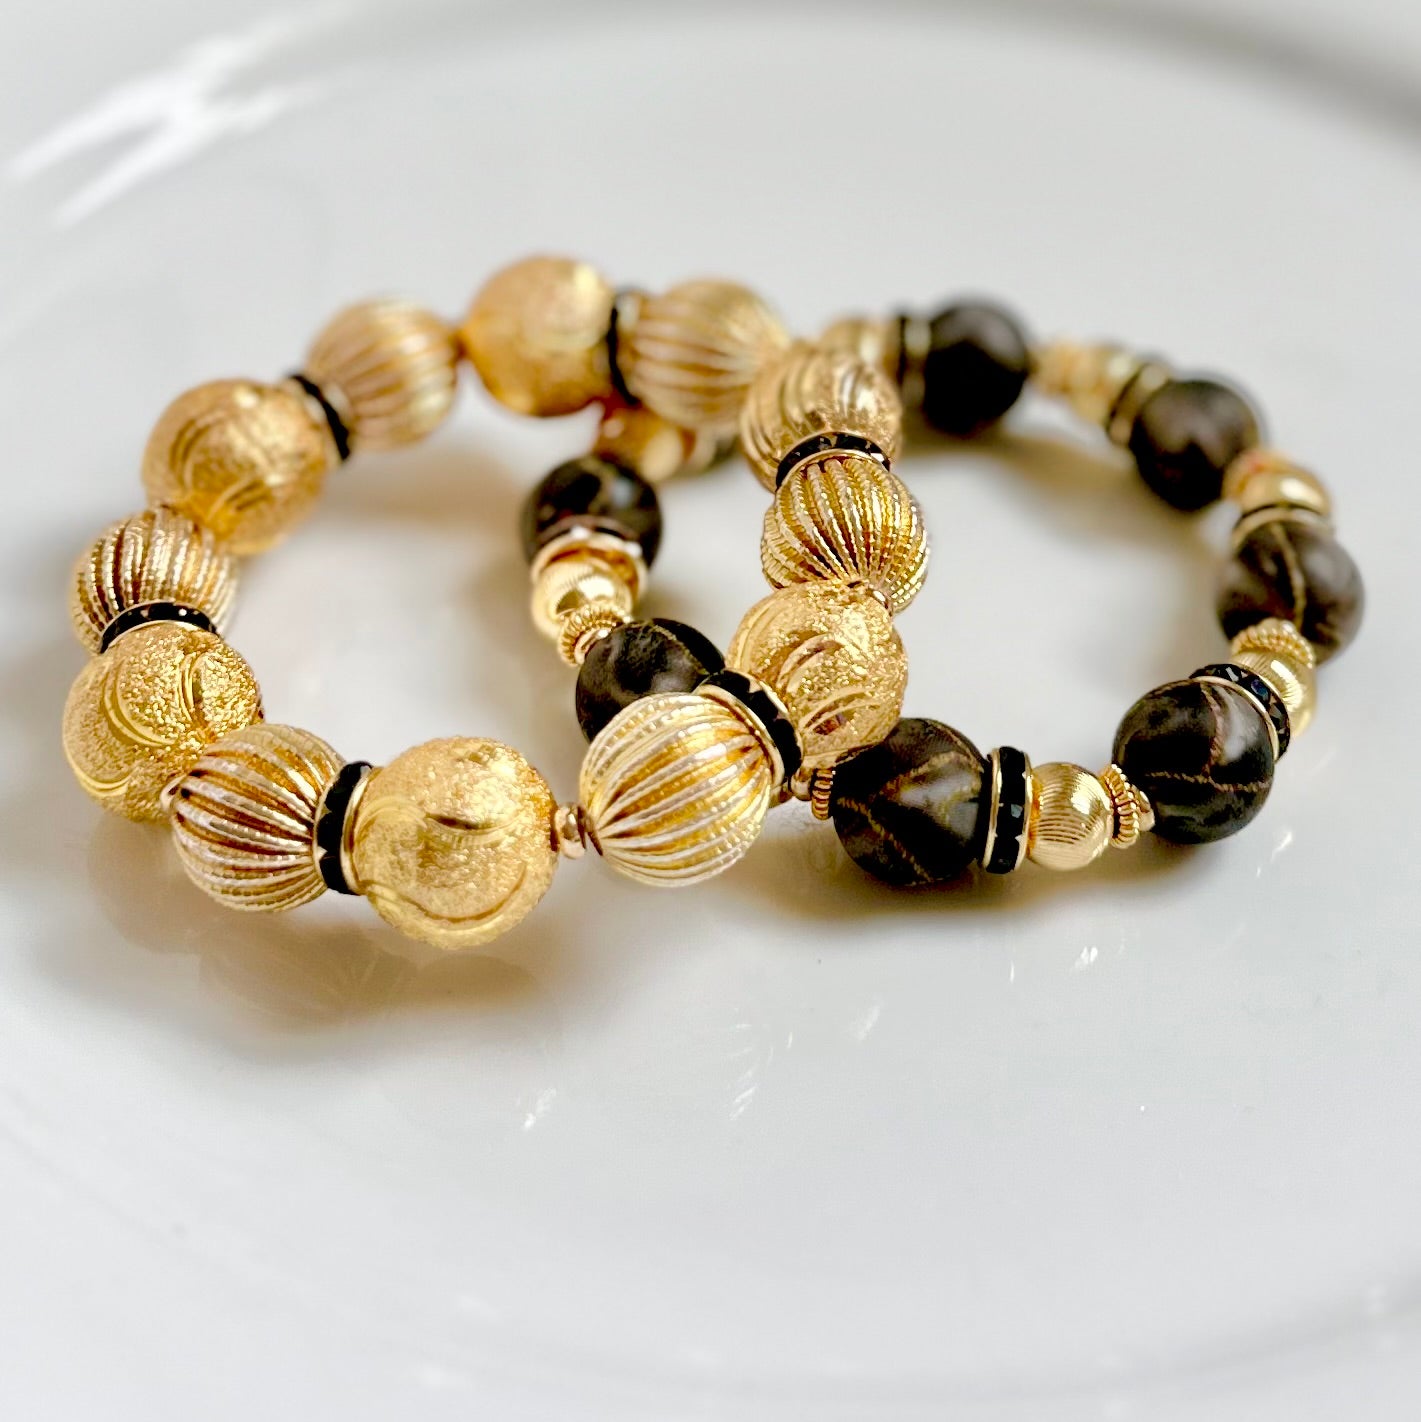 RIBBED AND TEXTURED GOLD STATEMENT BRACELET WITH BLACK ACCENTS